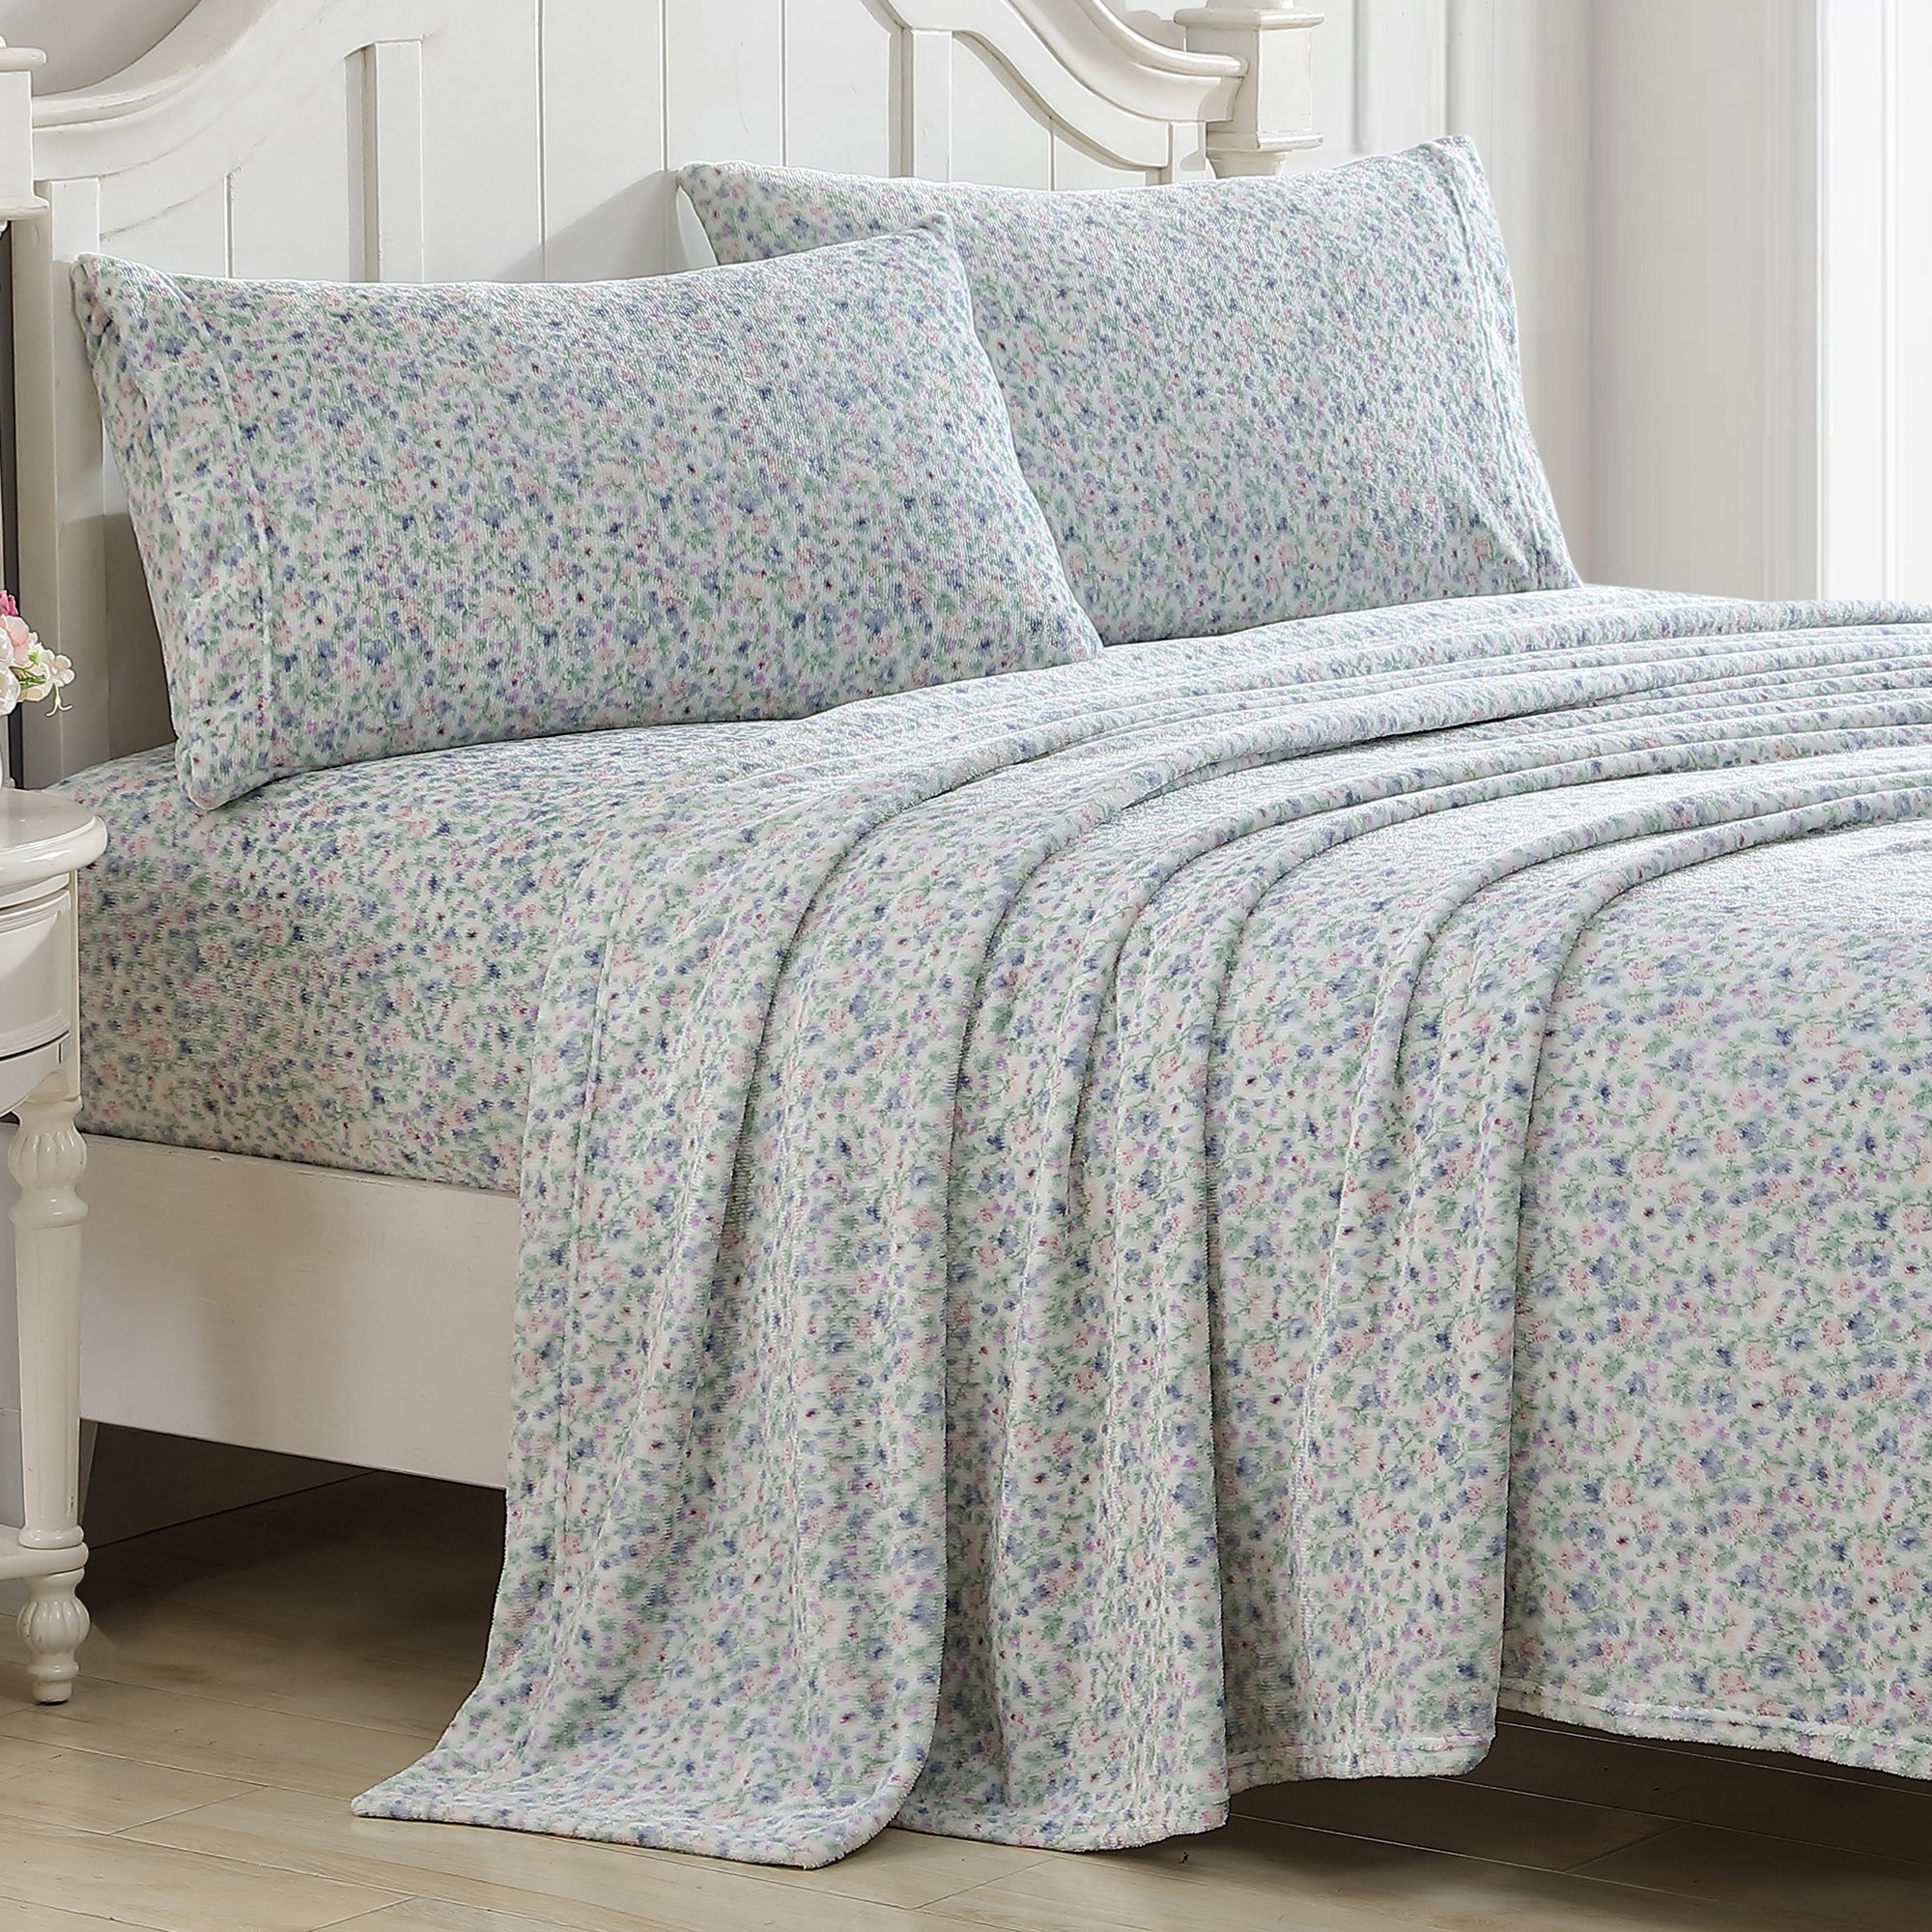 Cherish the timeless florals and warm embrace of the Laura Ashley Emogene Flannel Fleece Sheet Set Heather. 